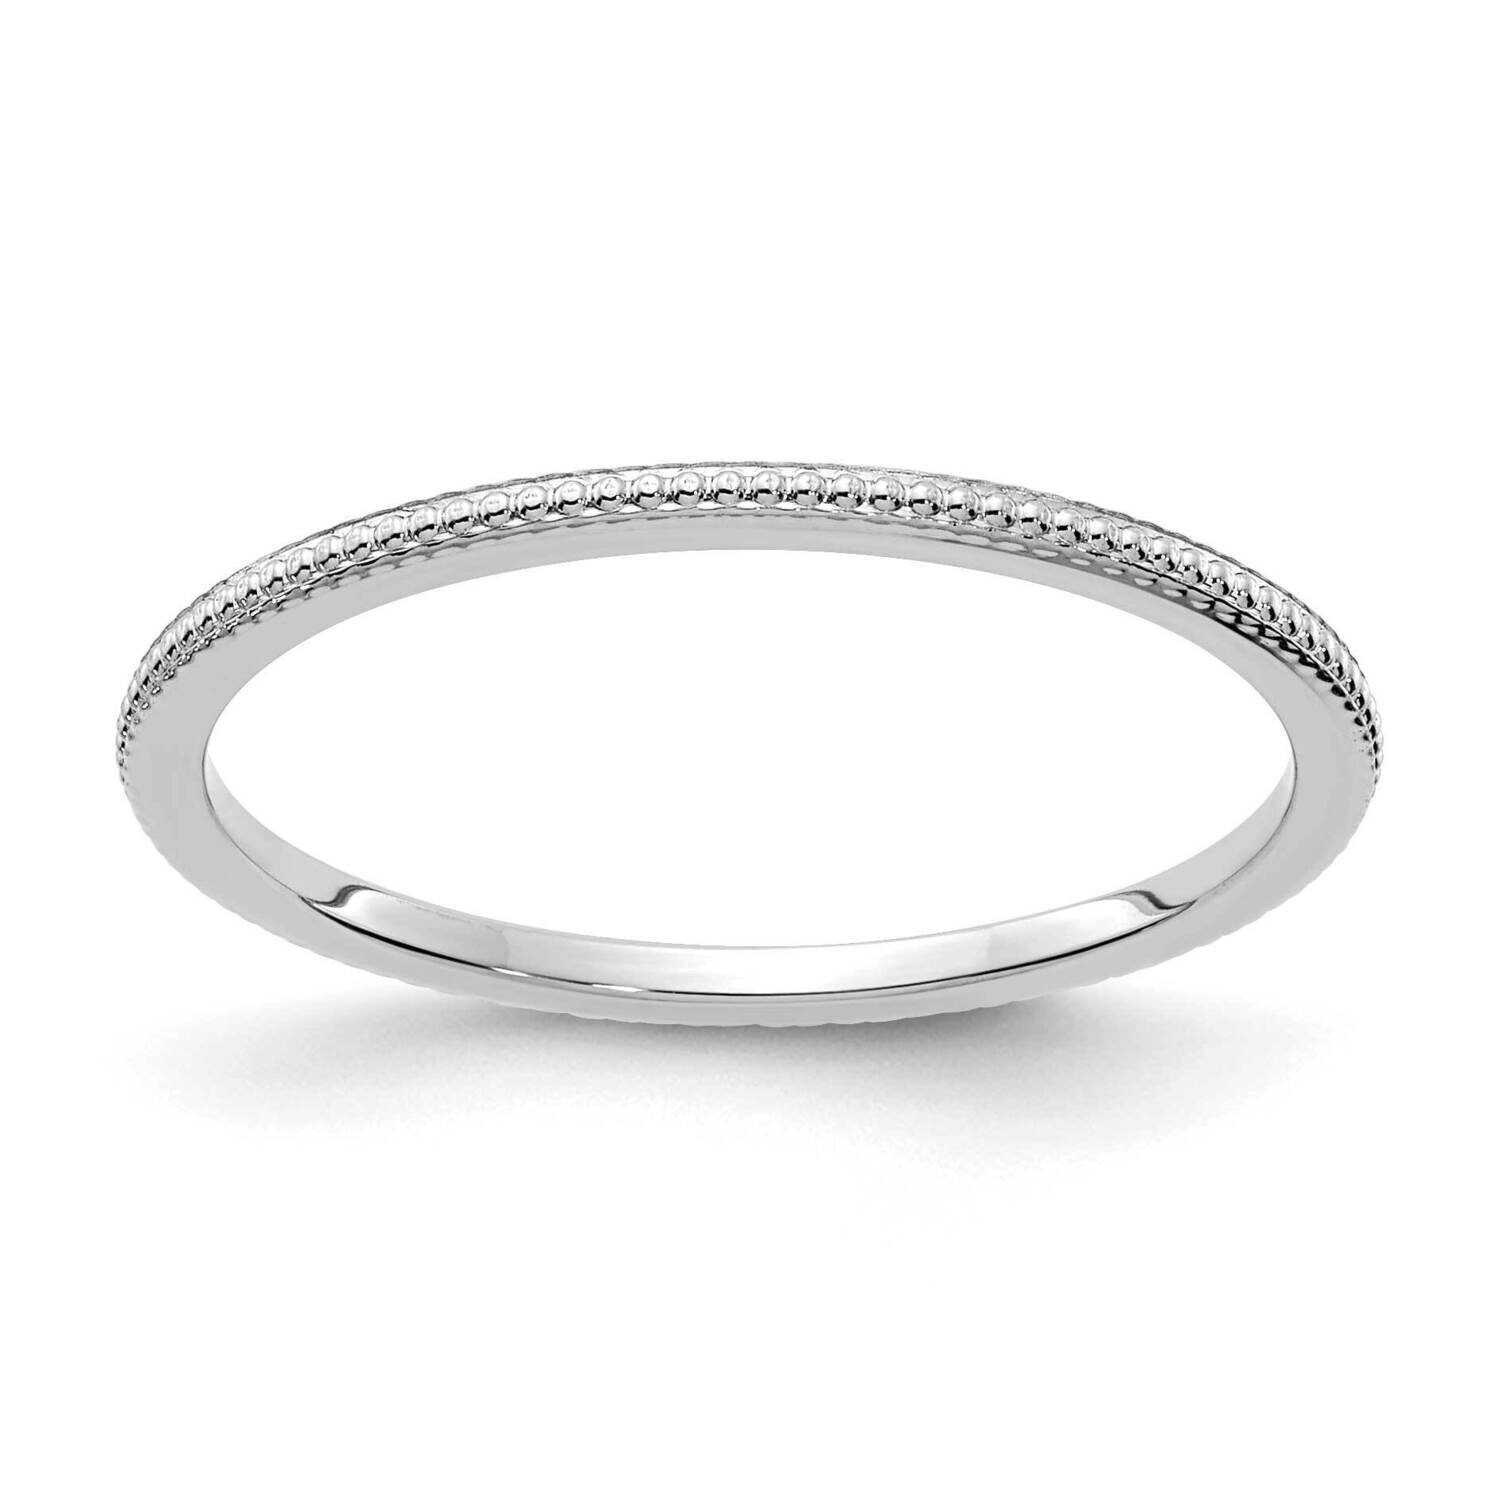 1.2mm Bead Stackable Band 10k White Gold 1STK18-120W